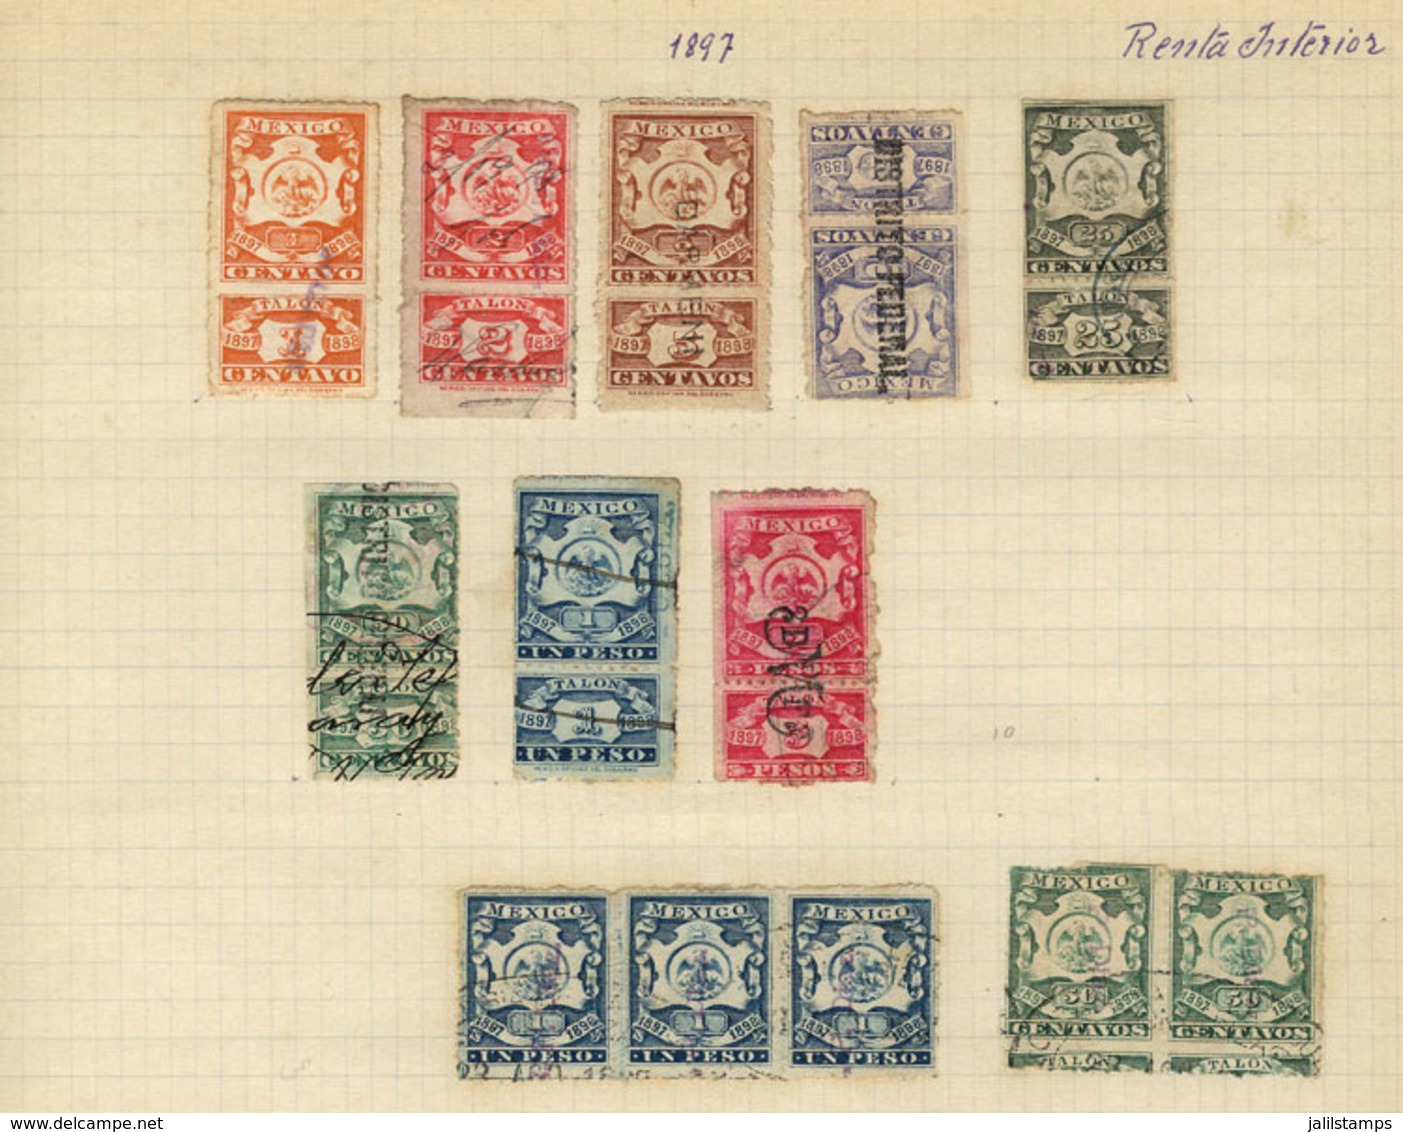 MEXICO: National Taxes, RENTA INTERIOR (Internal Revenue): Year 1897 To 1899, 6 Album Pages Of An Old Collection With 10 - Mexico